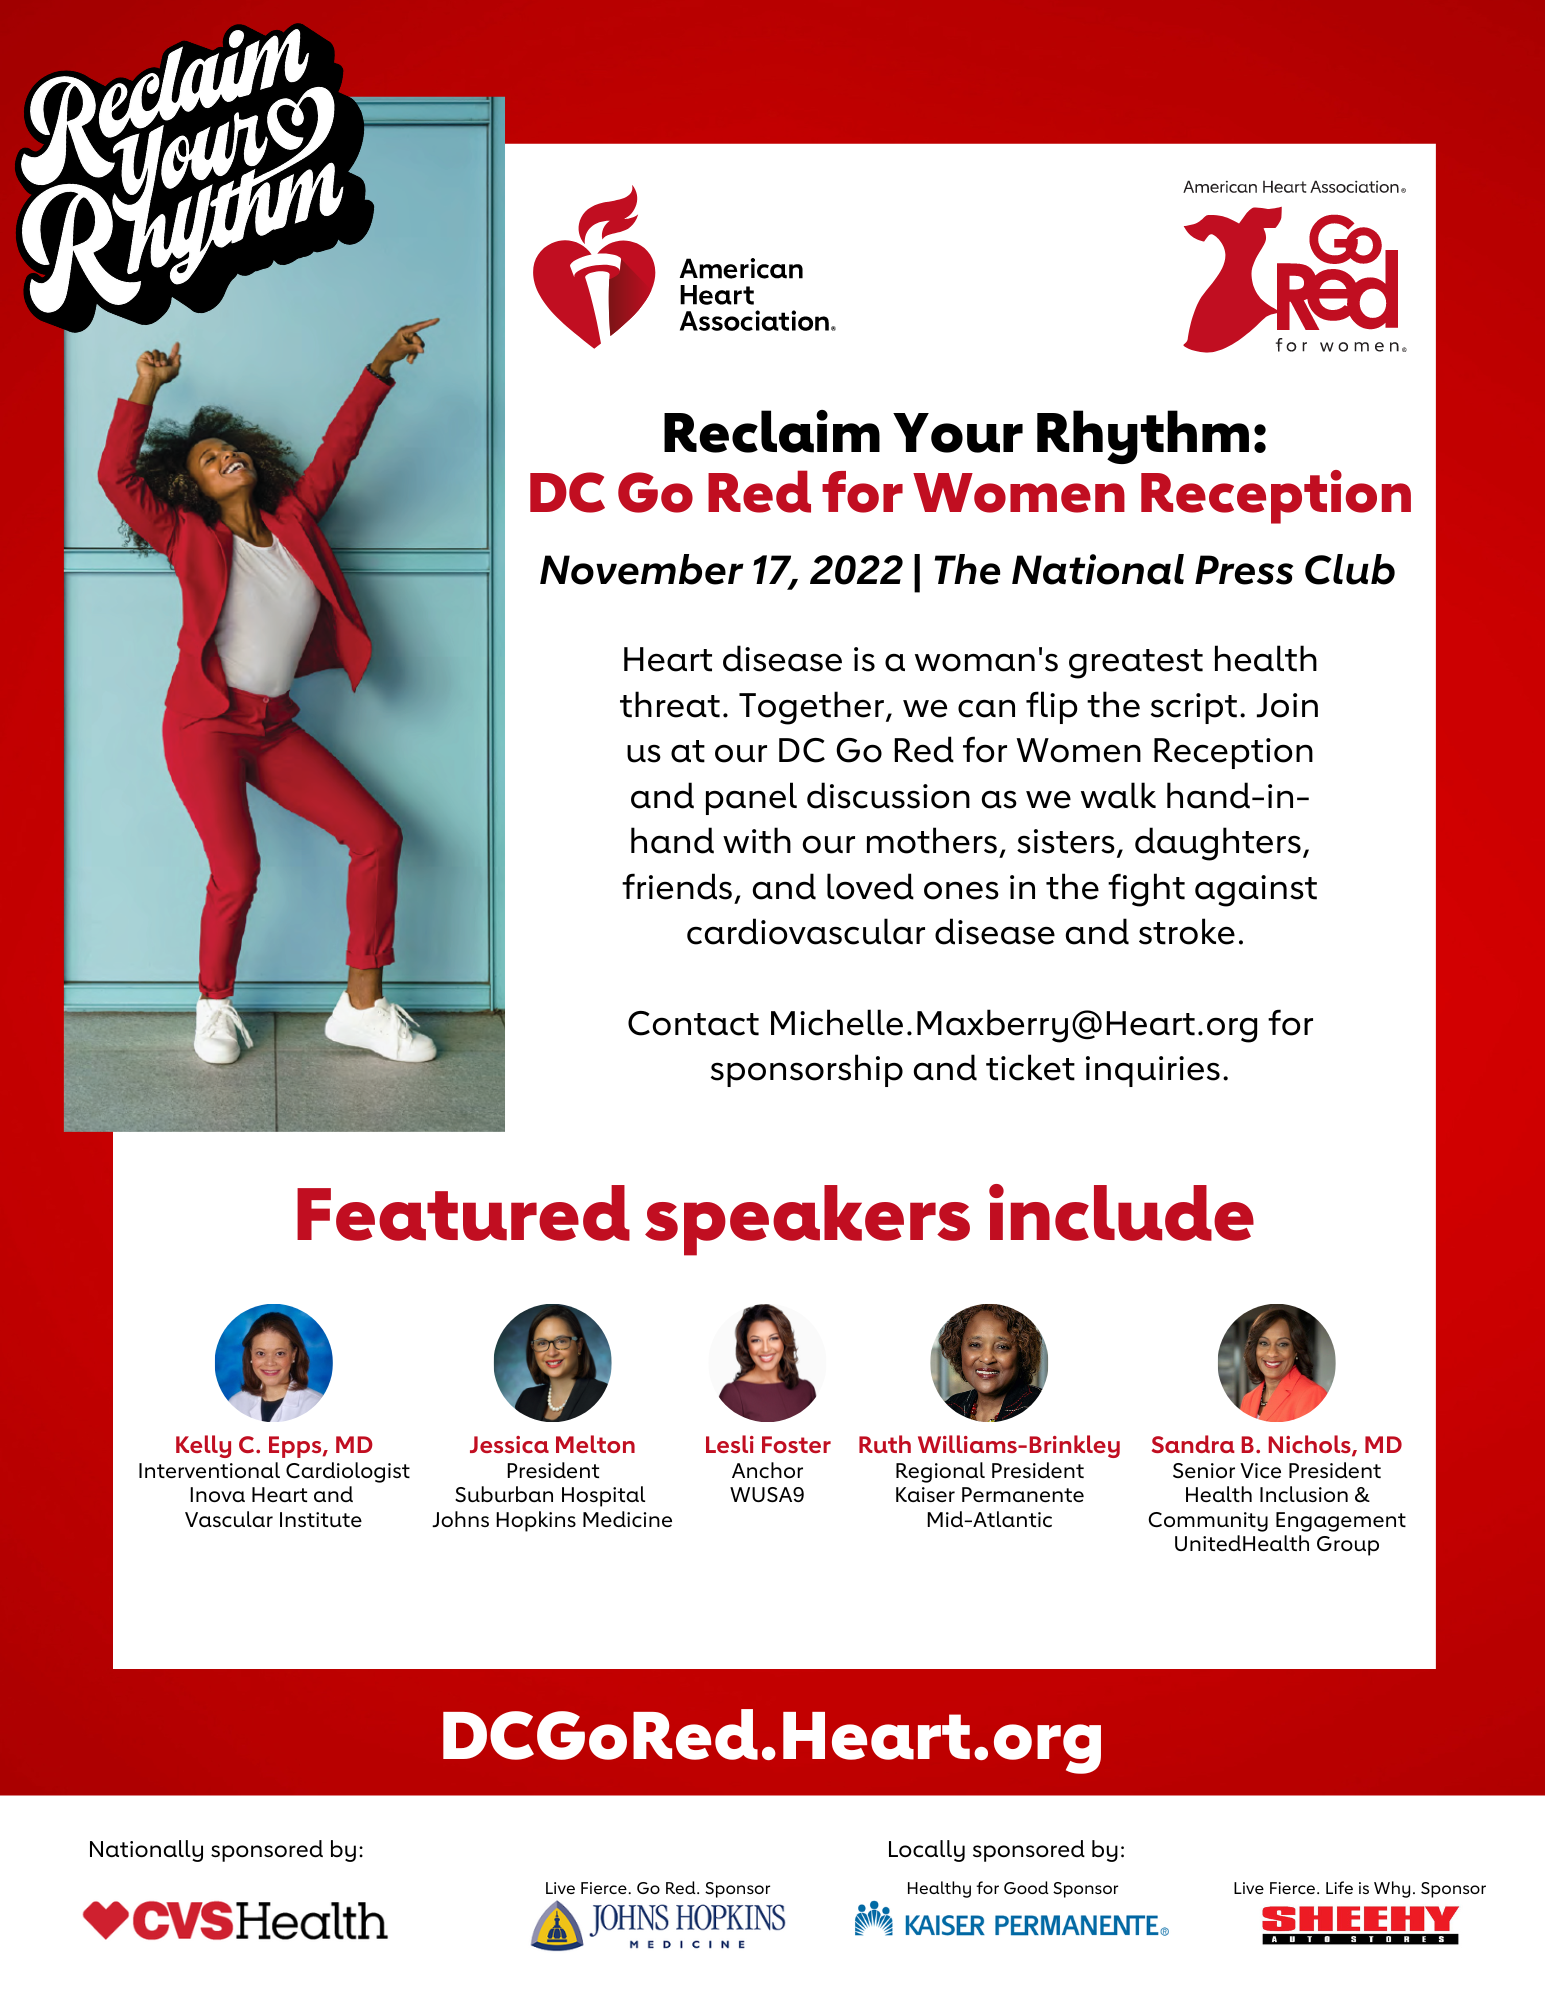 Reclaim your Rhythm at the DC Go Red for Women Reception on Nov. 17